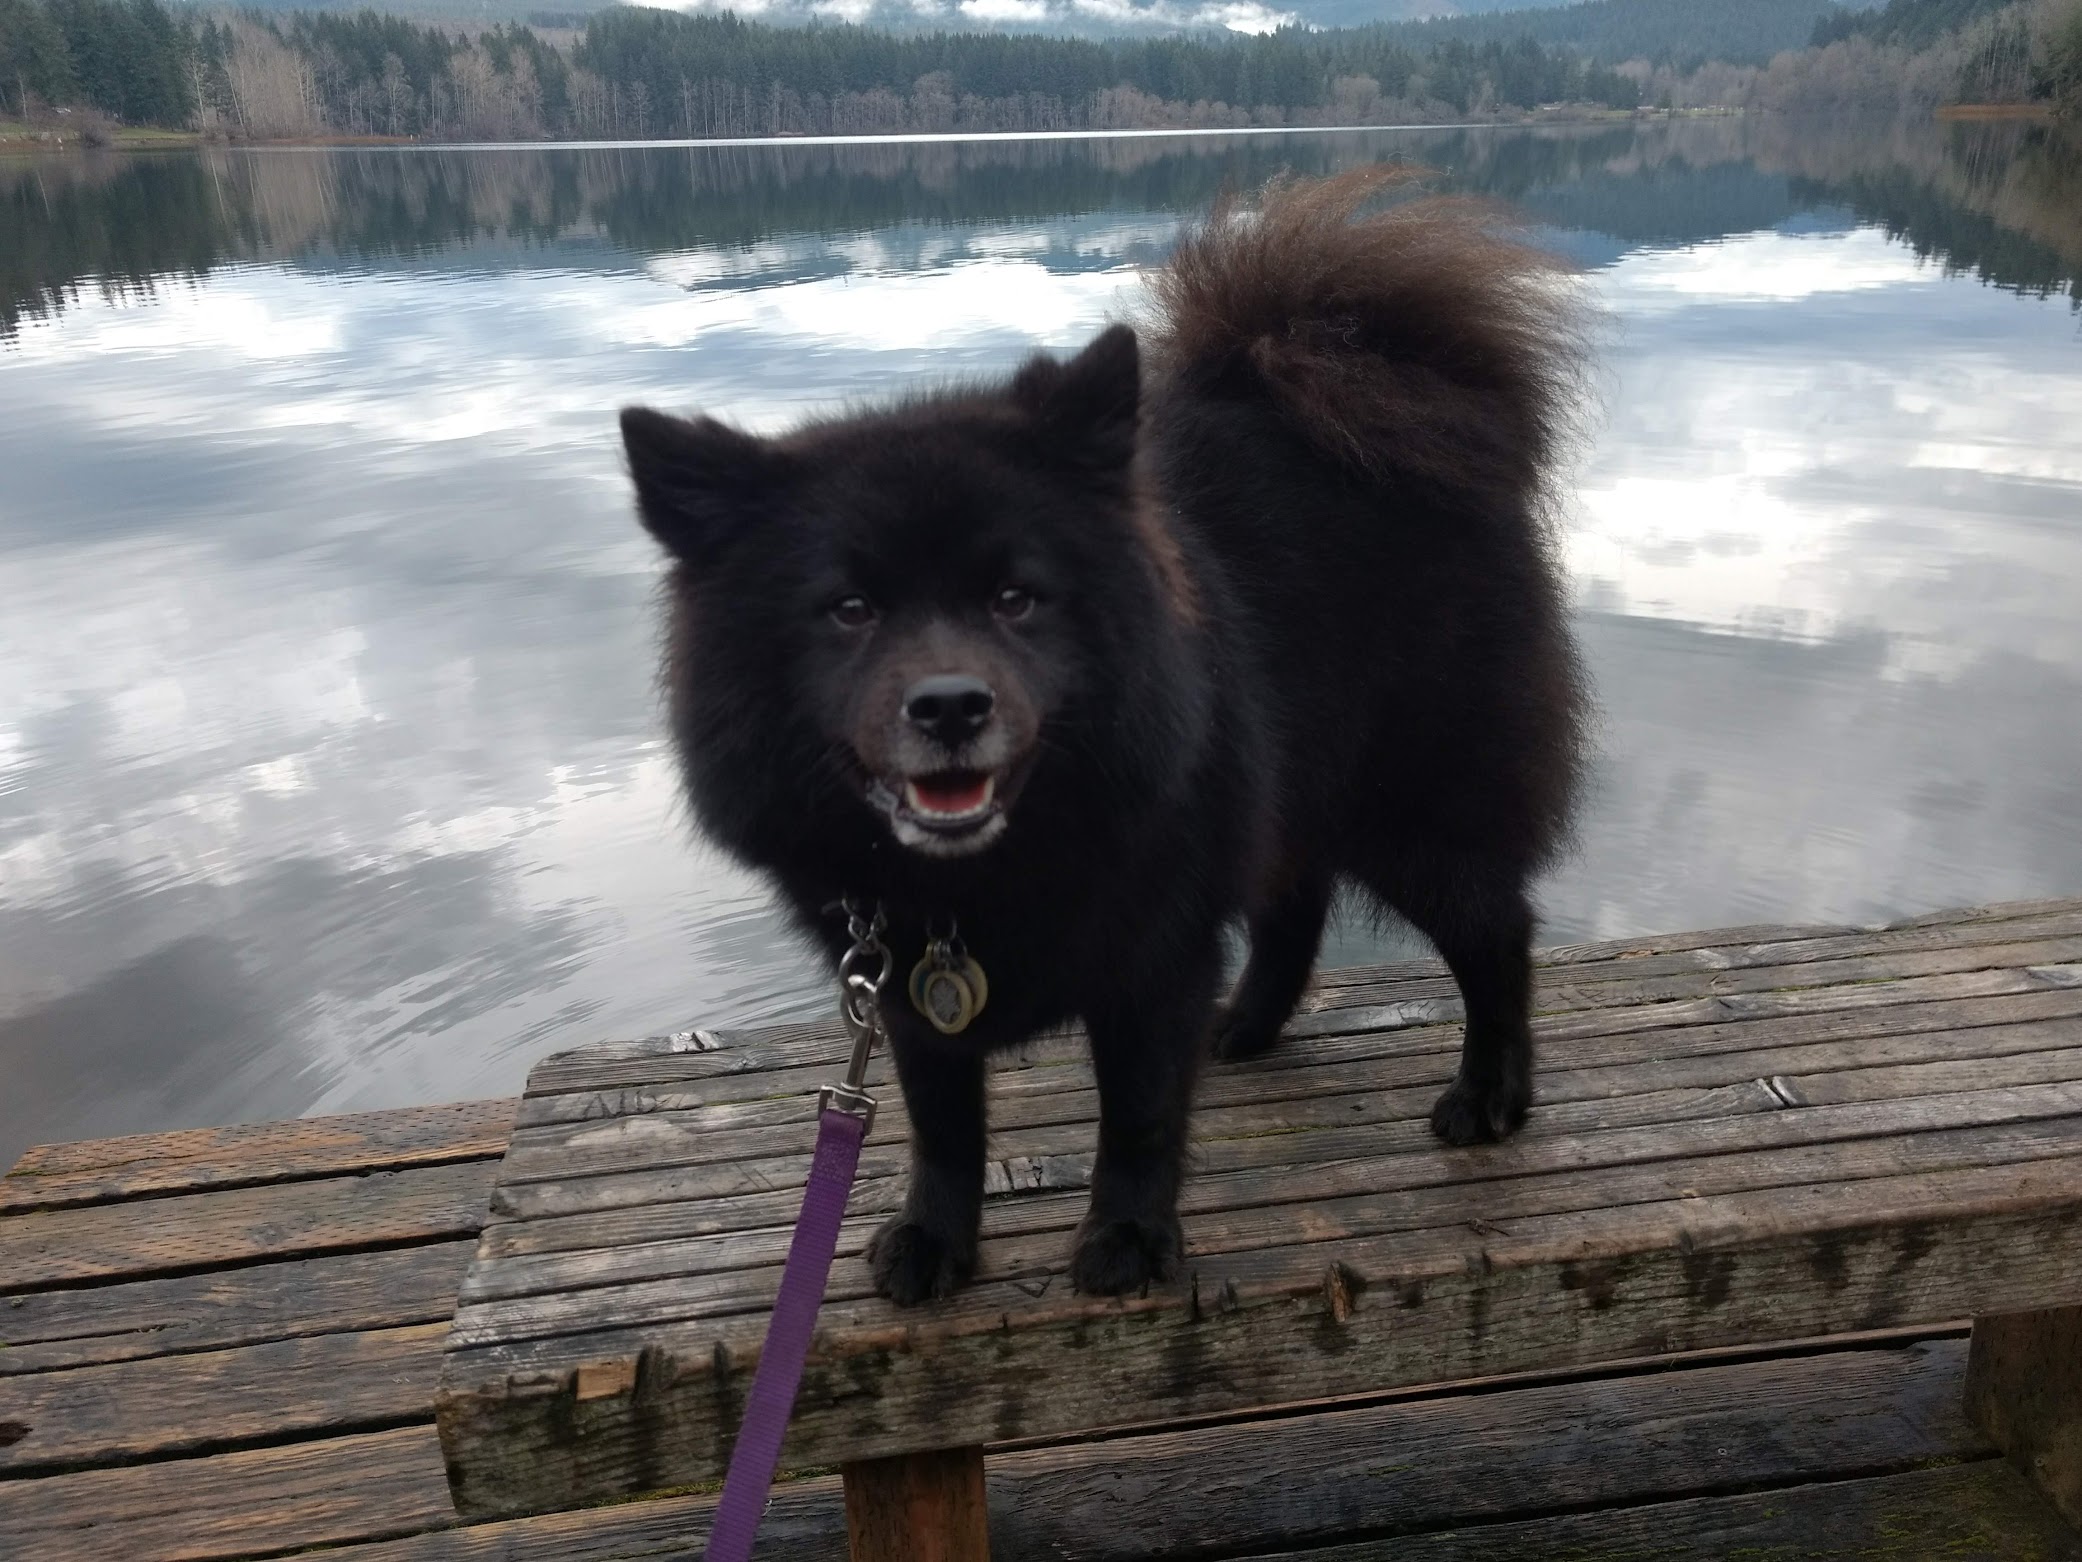 A fluffy black dog looks joyfully at the camera on a dock in front of a lake.